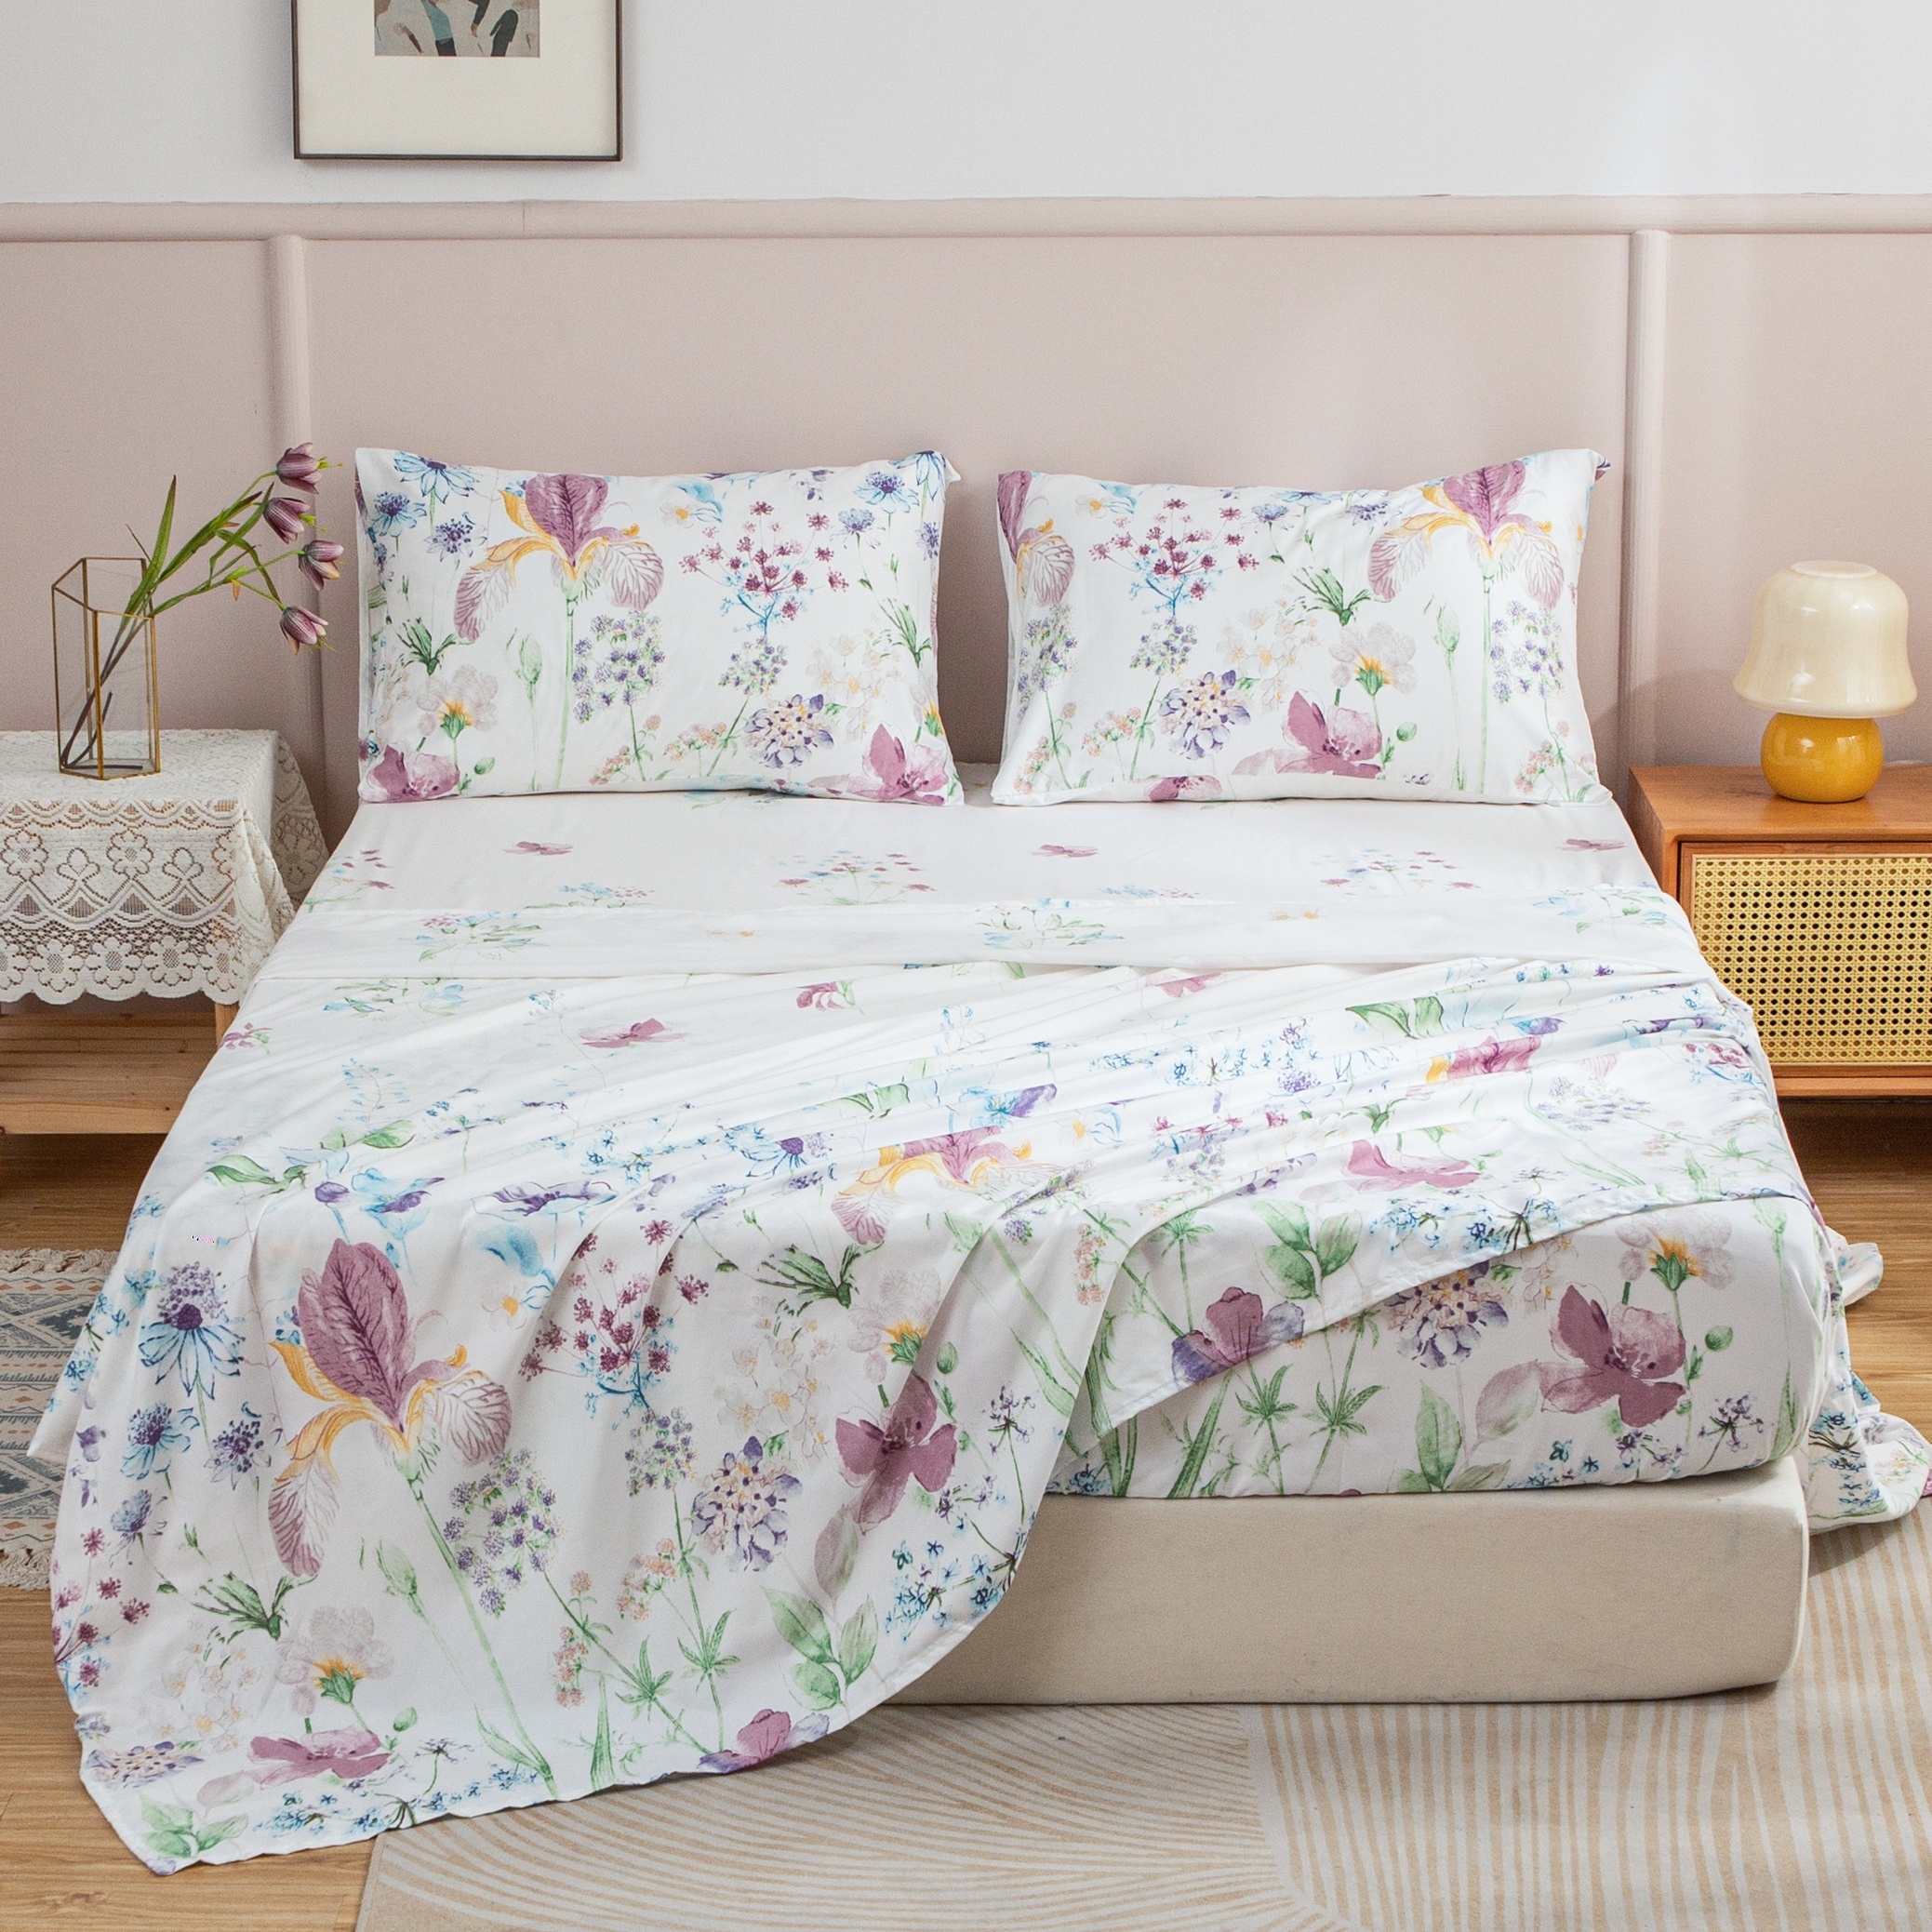 

4pcs Flower Print Fitted Sheet Set, Soft Comfortable Breathable Bedding Set, For Bedroom, Guest Room (1*flat Sheet + 1* Fitted Sheet + 2*pillowcases, Without Core)